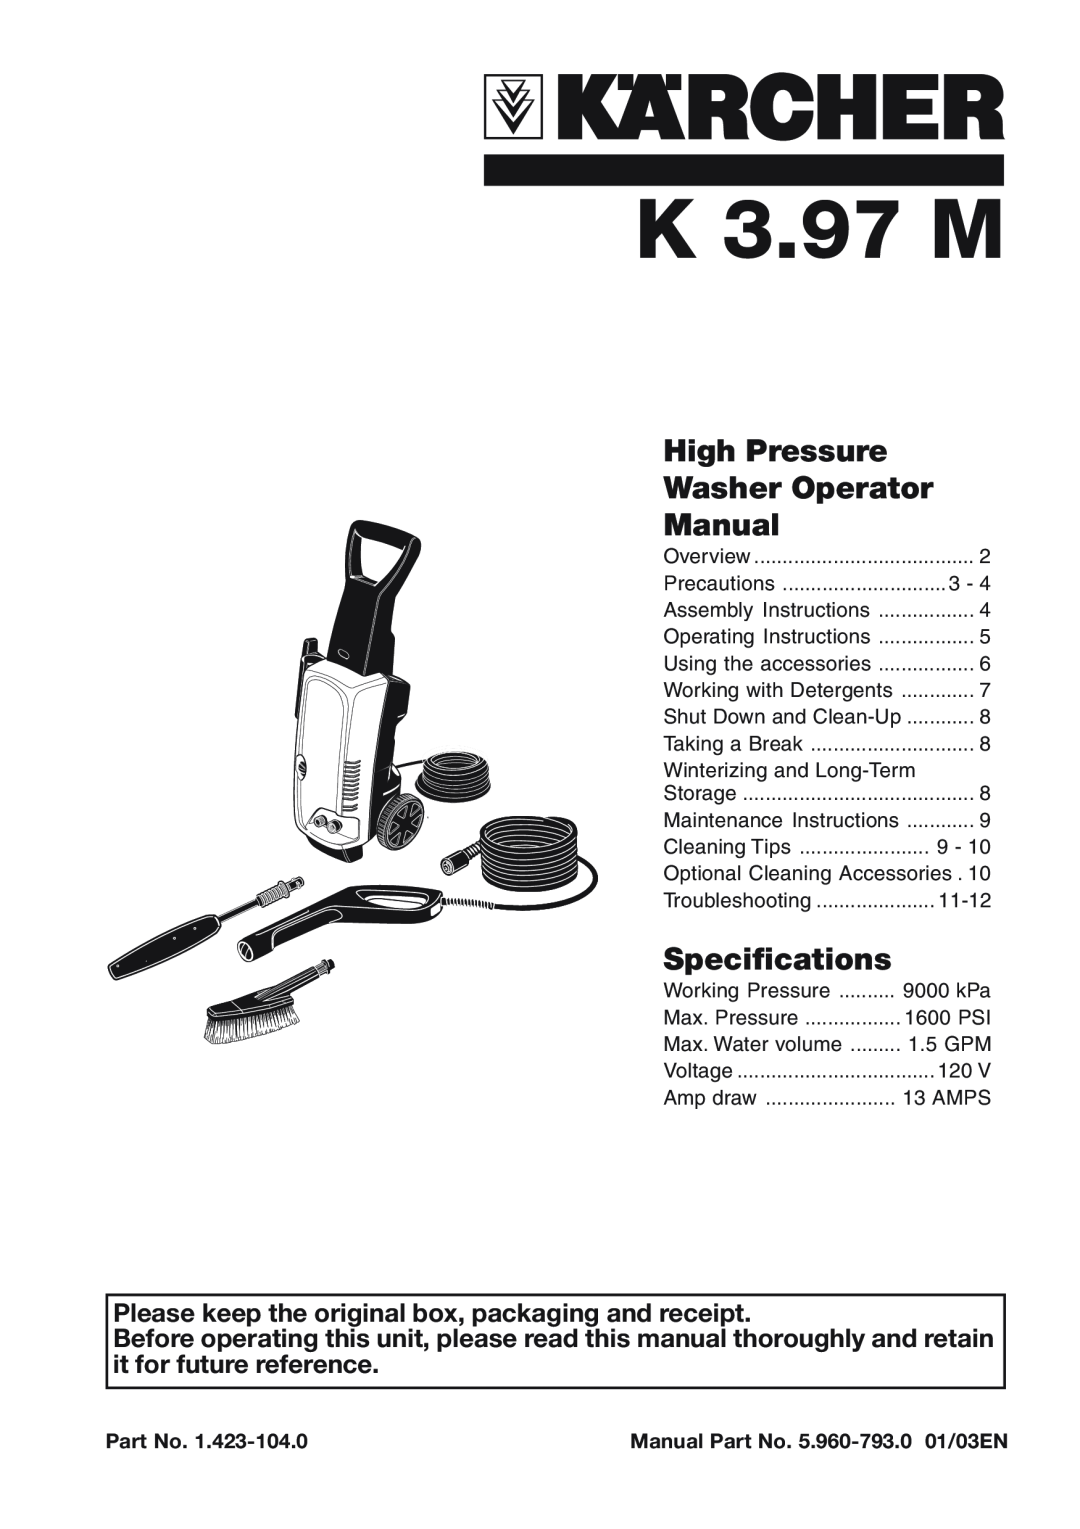 Karcher K 3.97M specifications High Pressure, Washer Operator, Manual, Specifications, K 3.97 M 